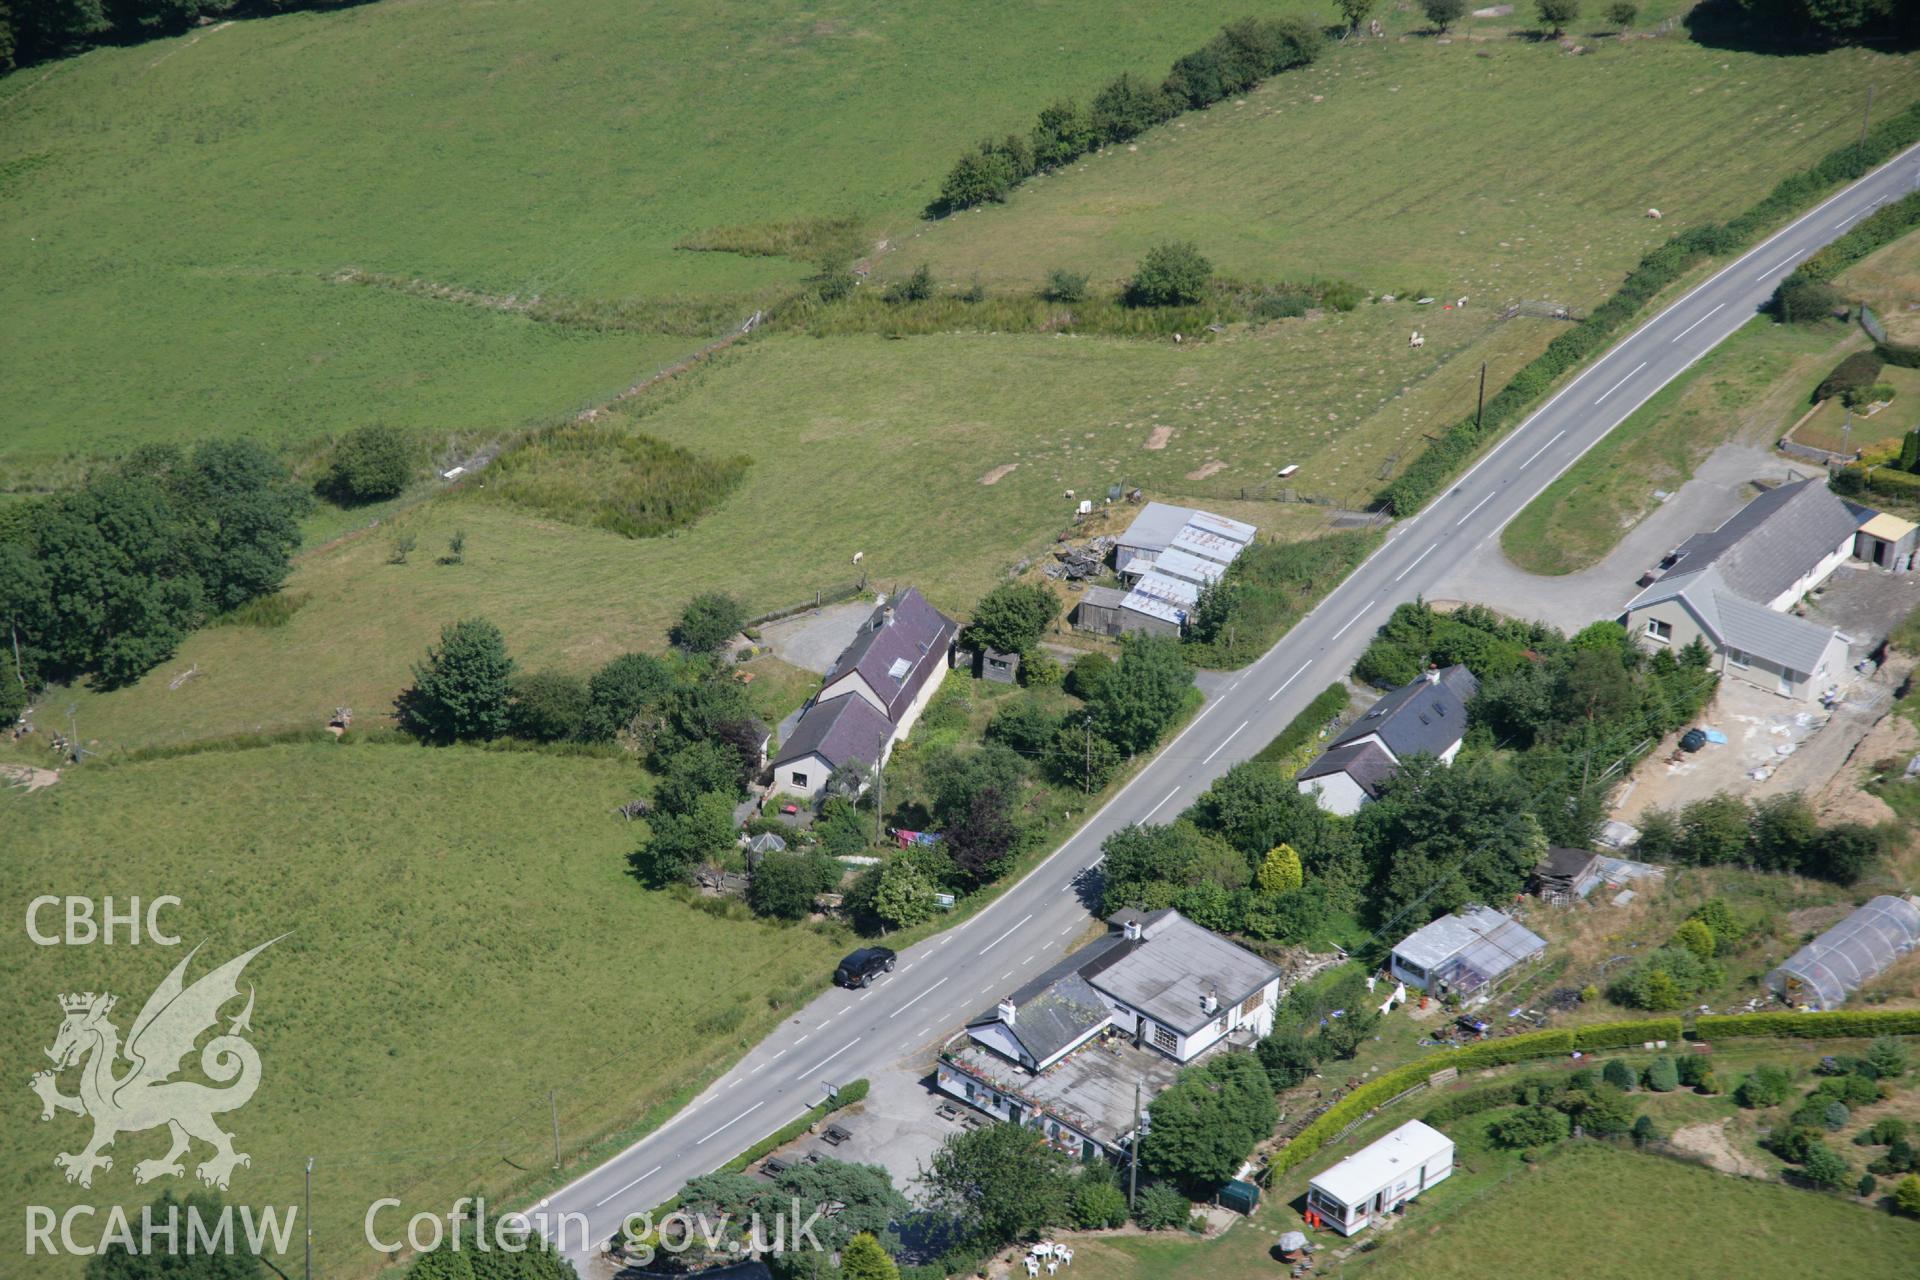 RCAHMW colour oblique aerial photograph of Pisgah village. Taken on 17 July 2006 by Toby Driver.